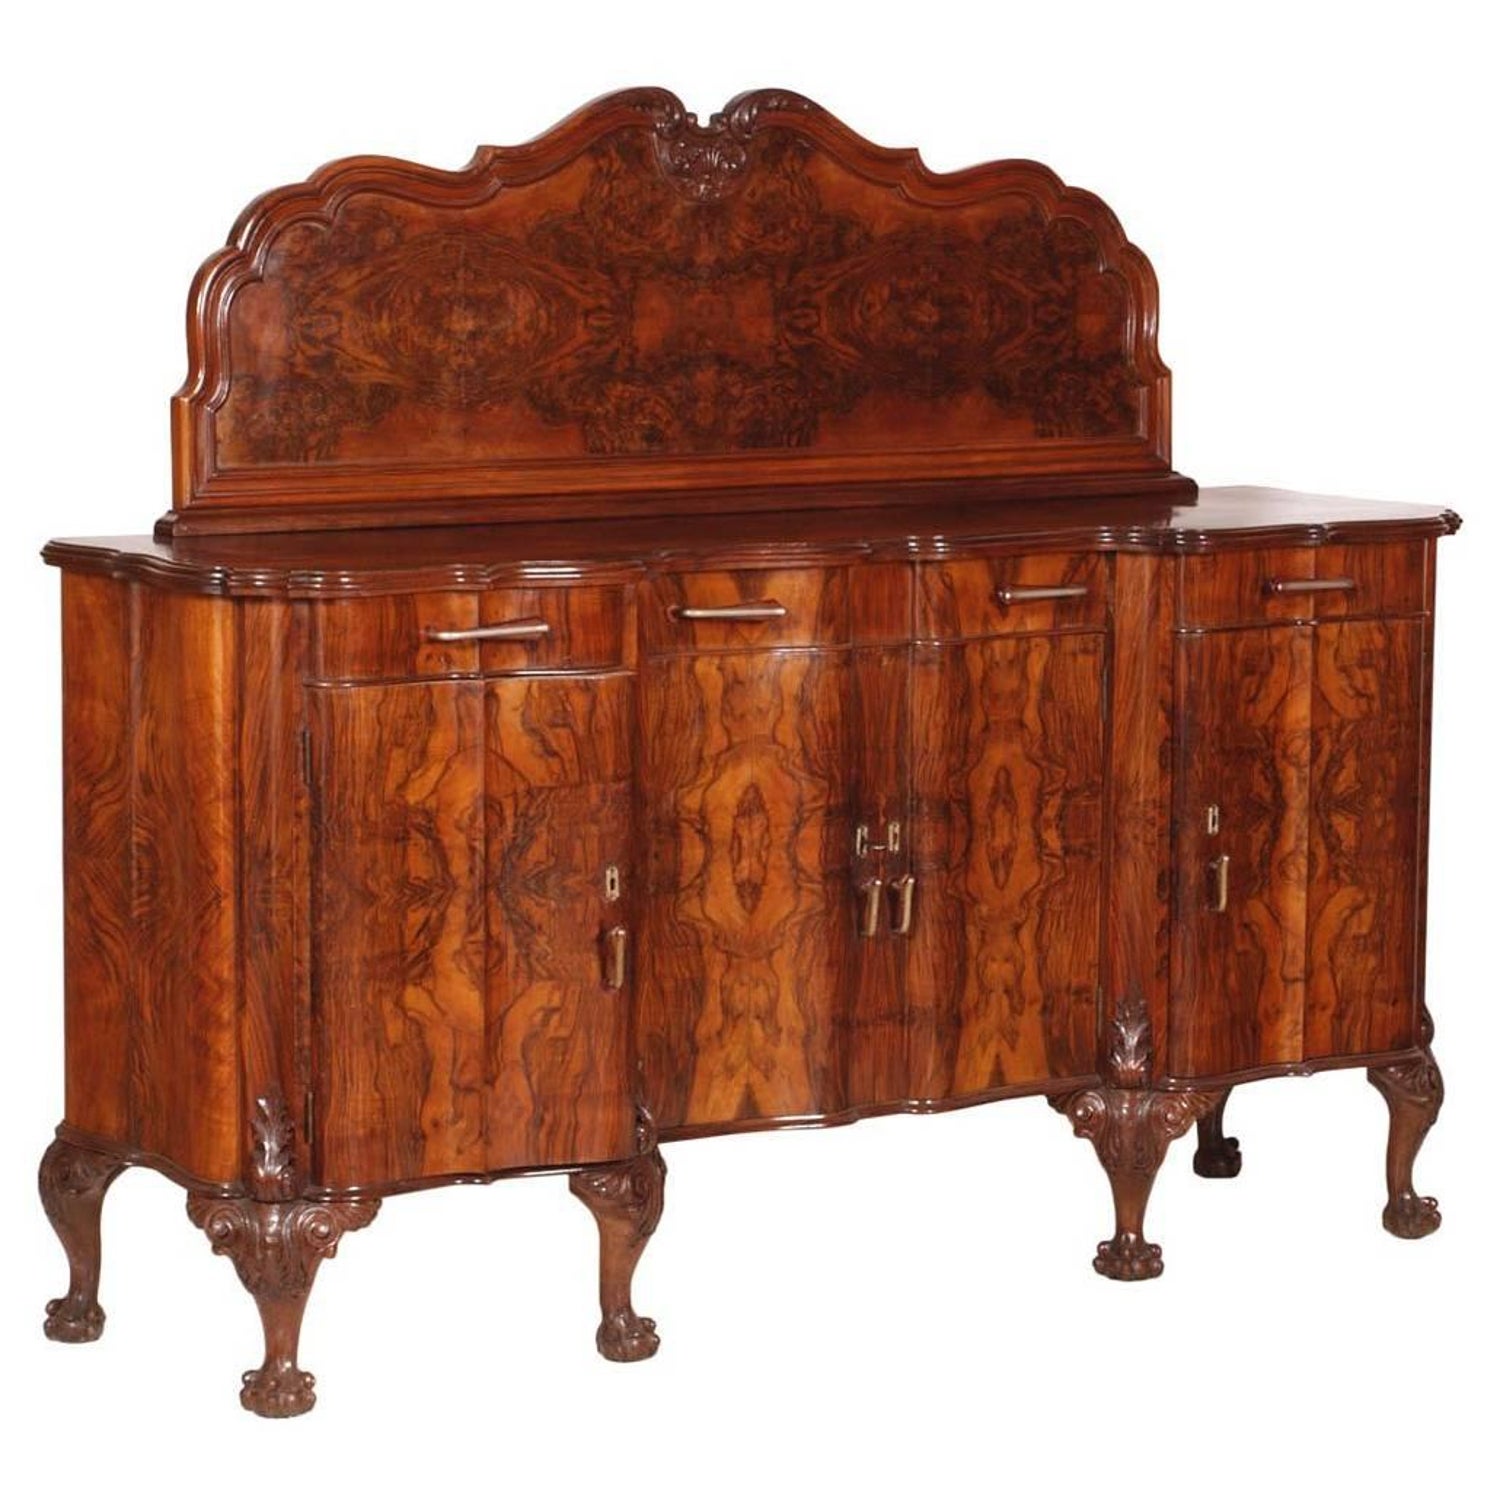 Baroque Revival Buffets - 8 For Sale at 1stDibs